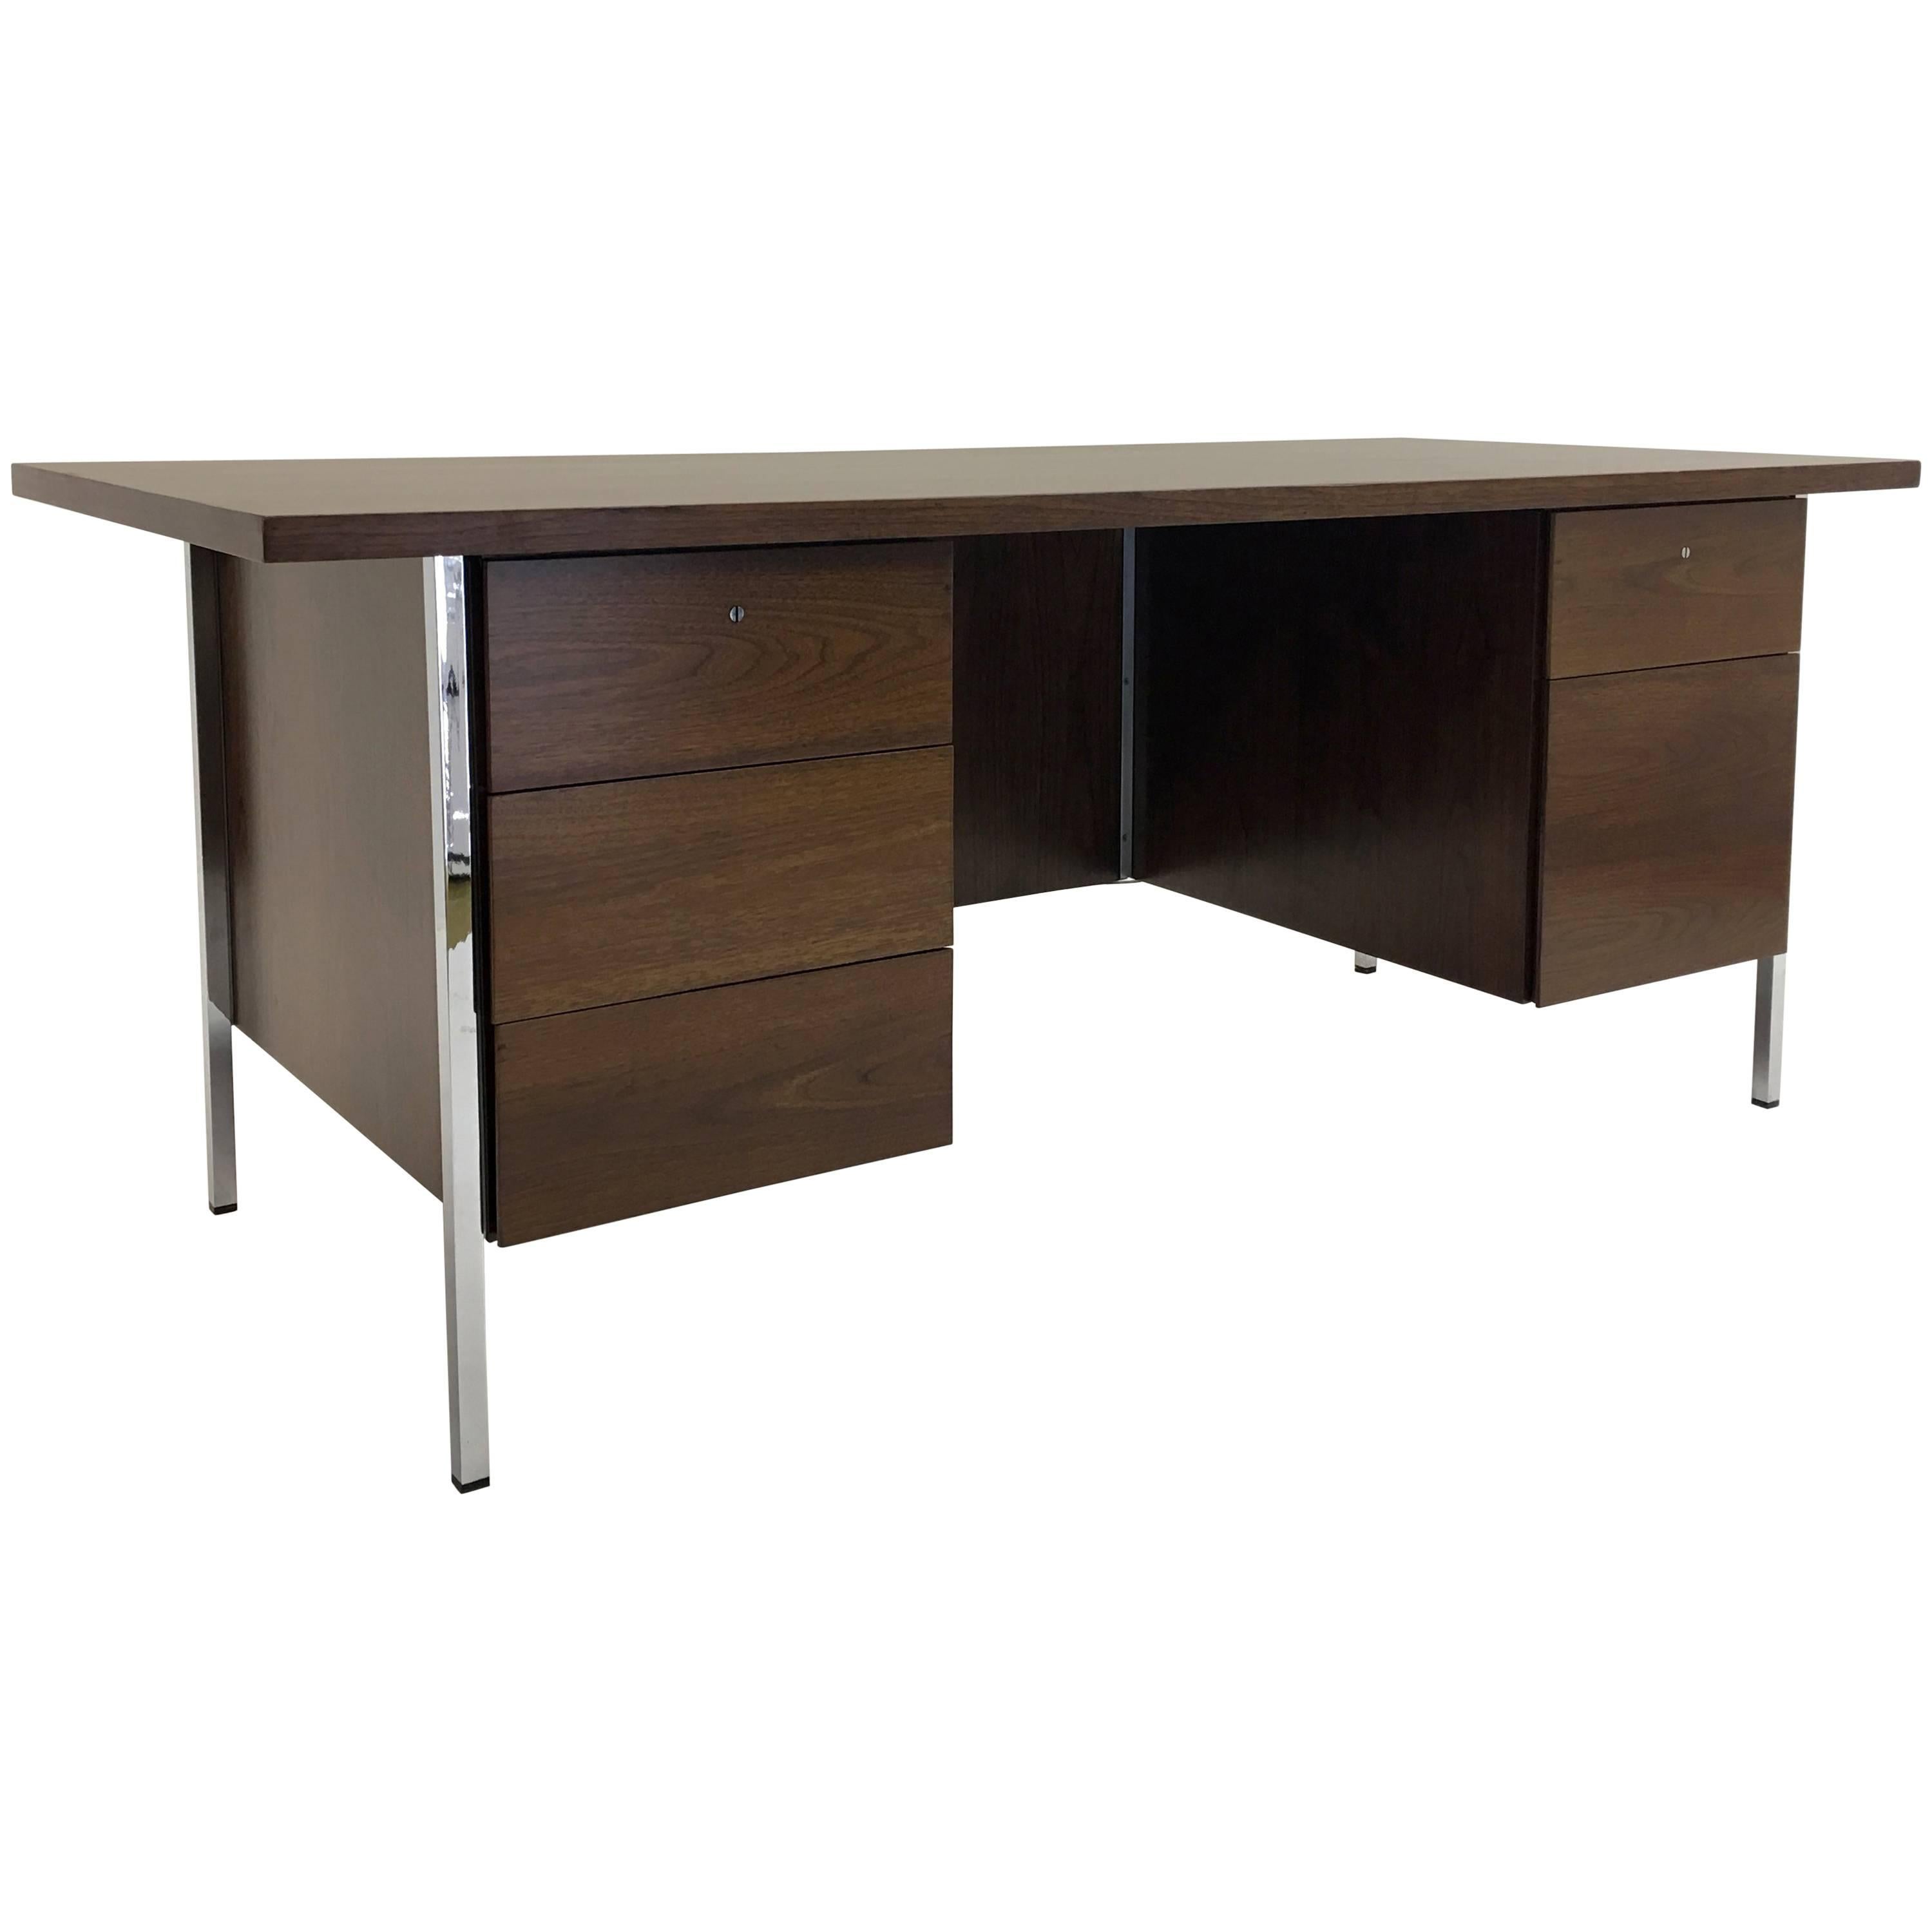  Exquisite 1952 Walnut Executive Desk by Florence Knoll for Knoll Associates